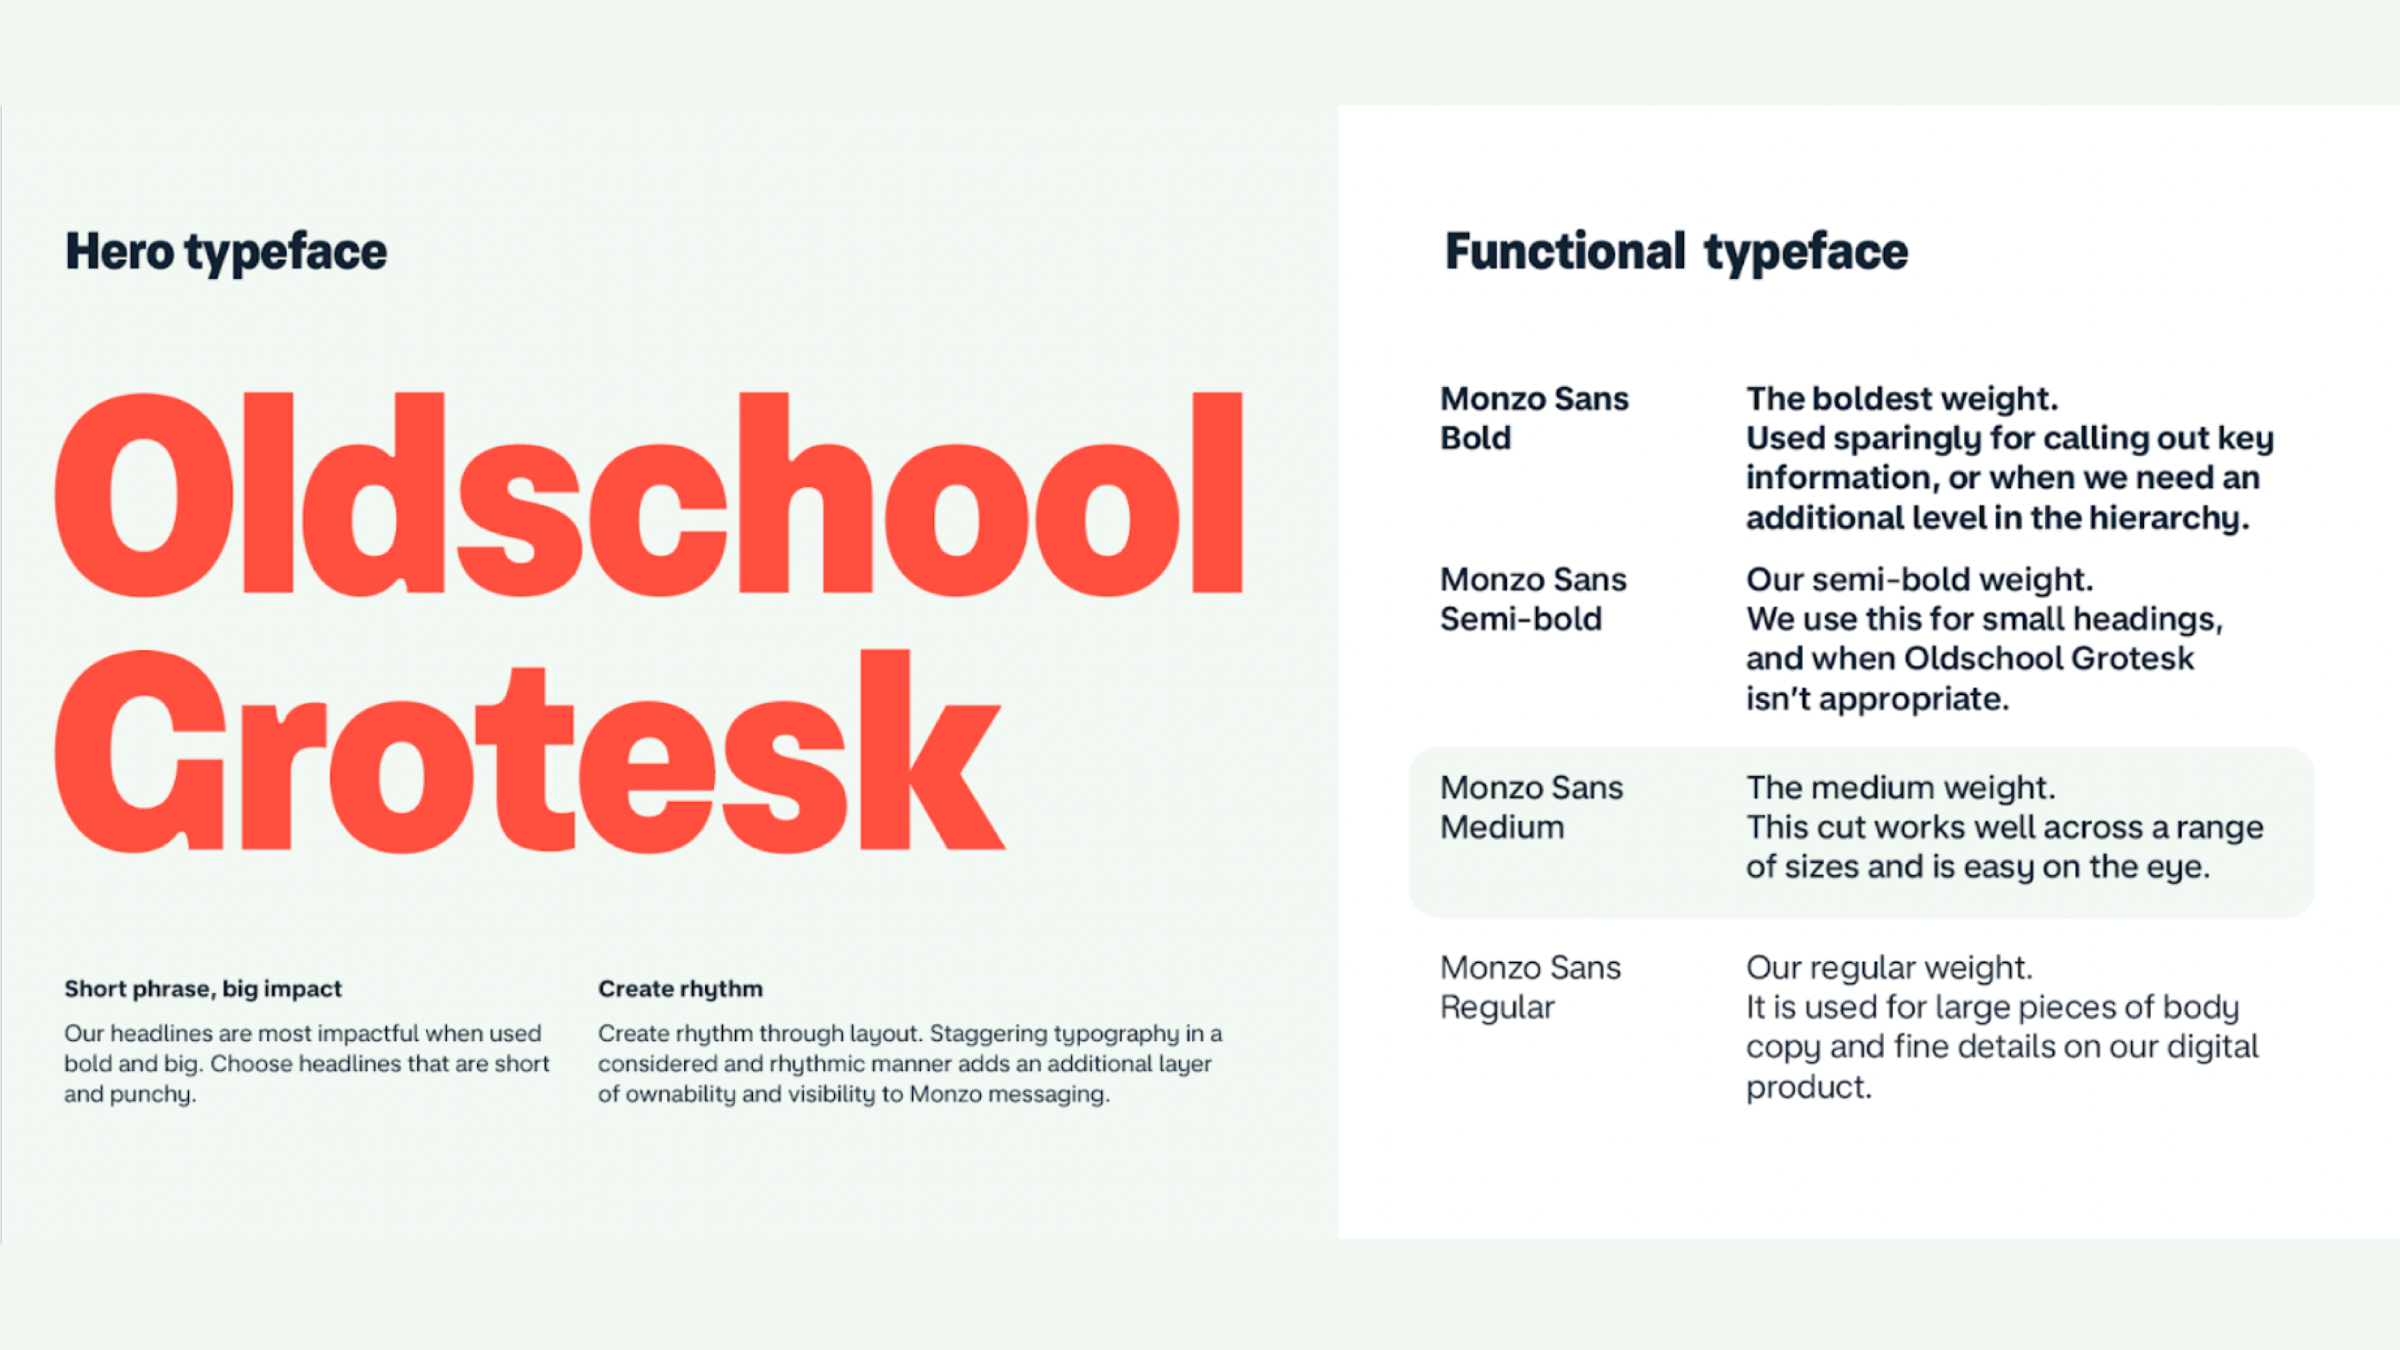 Showing our new hero typeface, Oldschool Grotesk. And our functional typeface, Monzo Sans. 